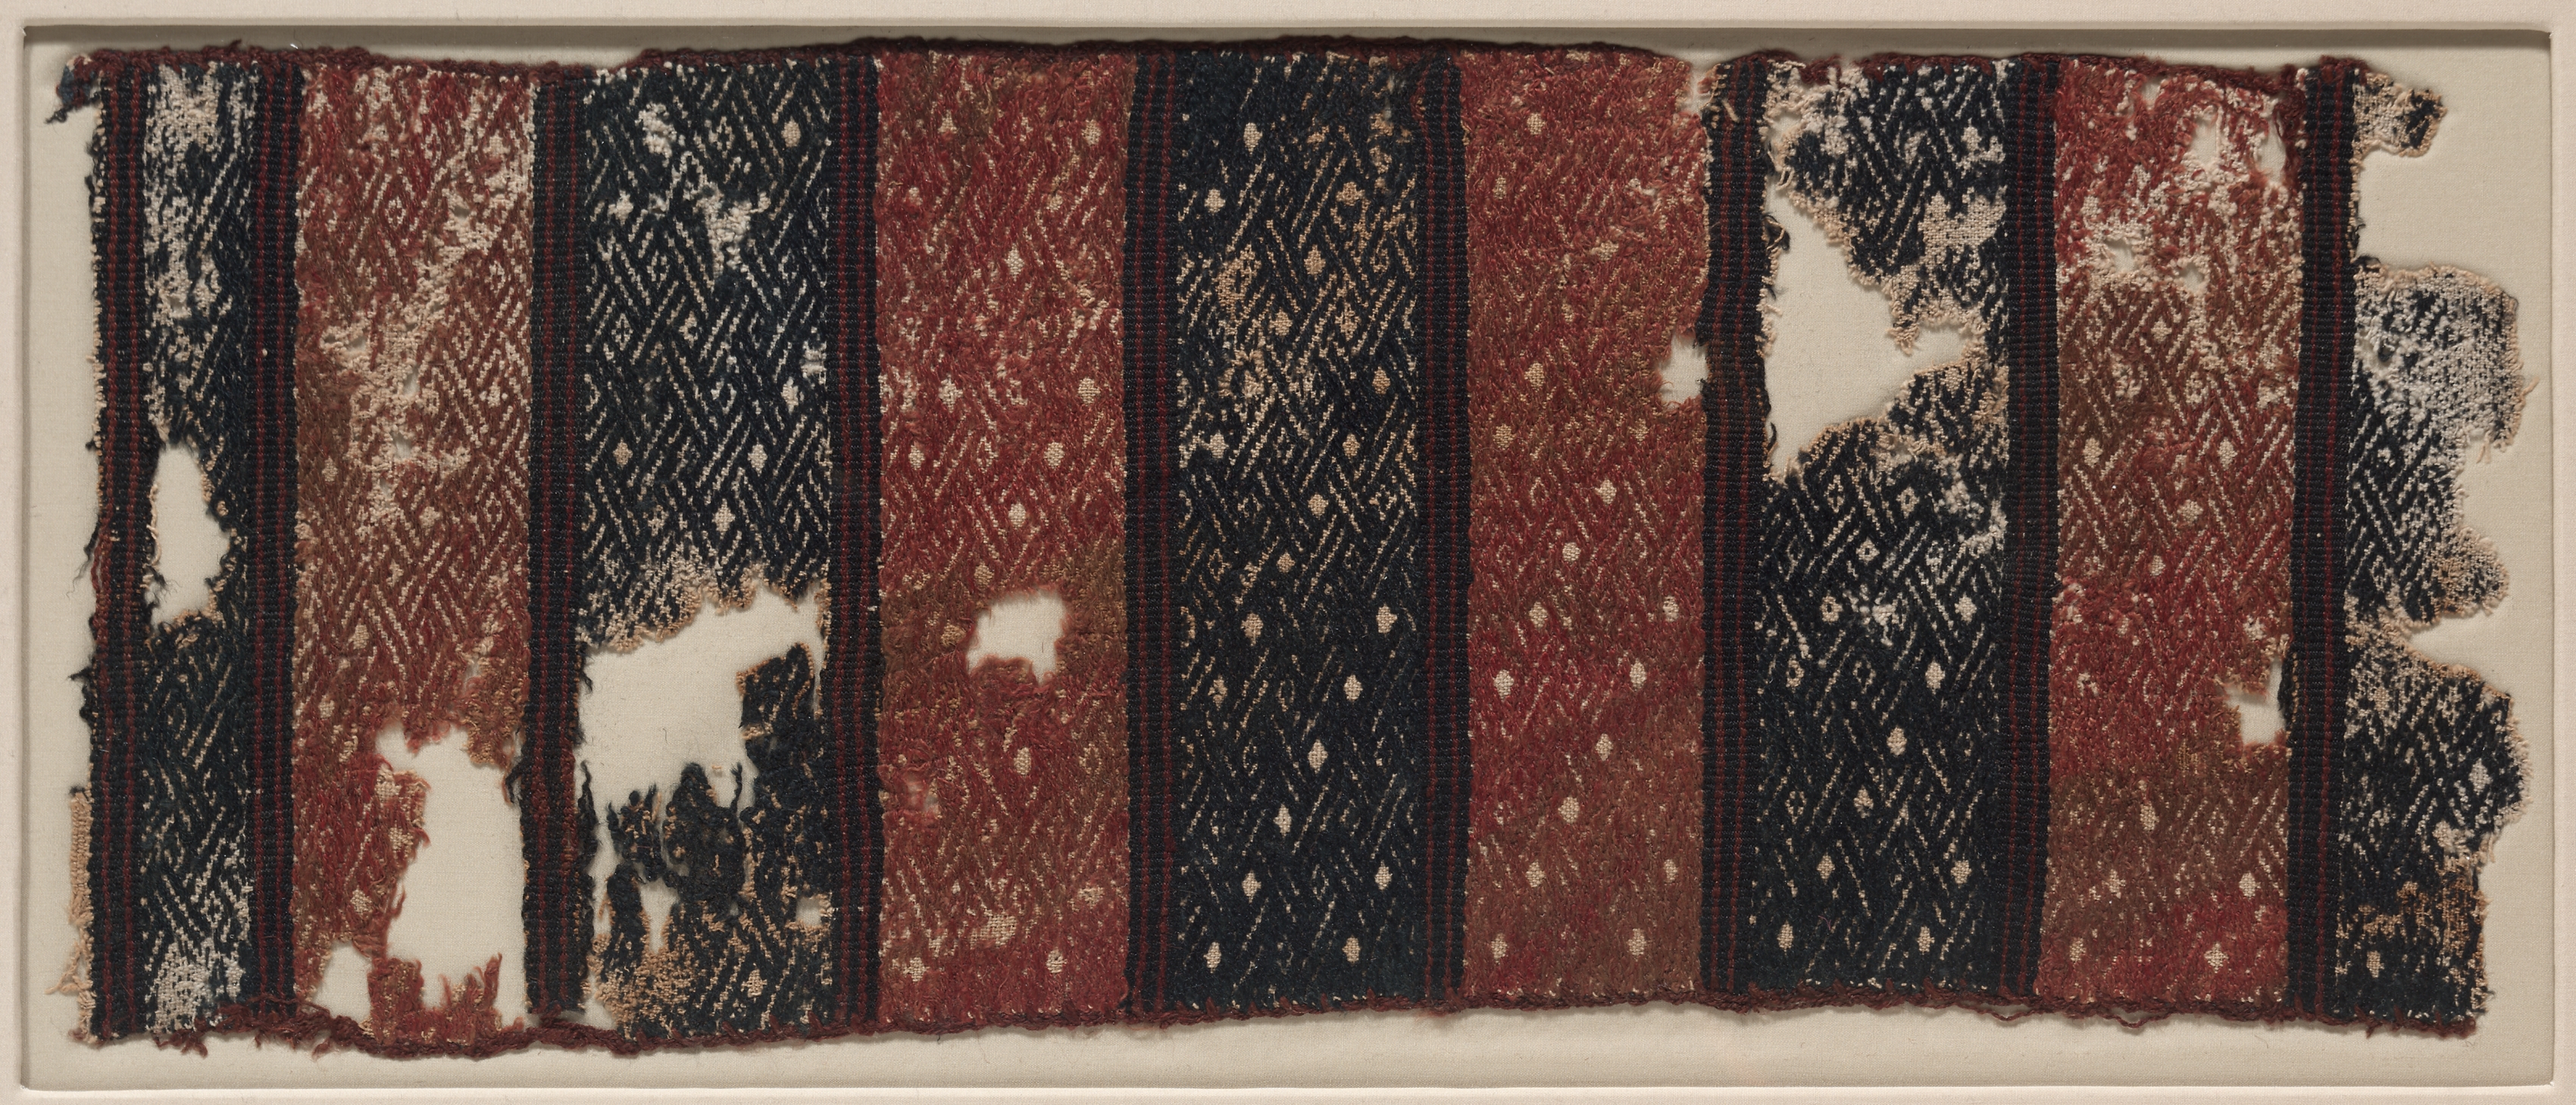 Textile Fragment with Interlace Pattern